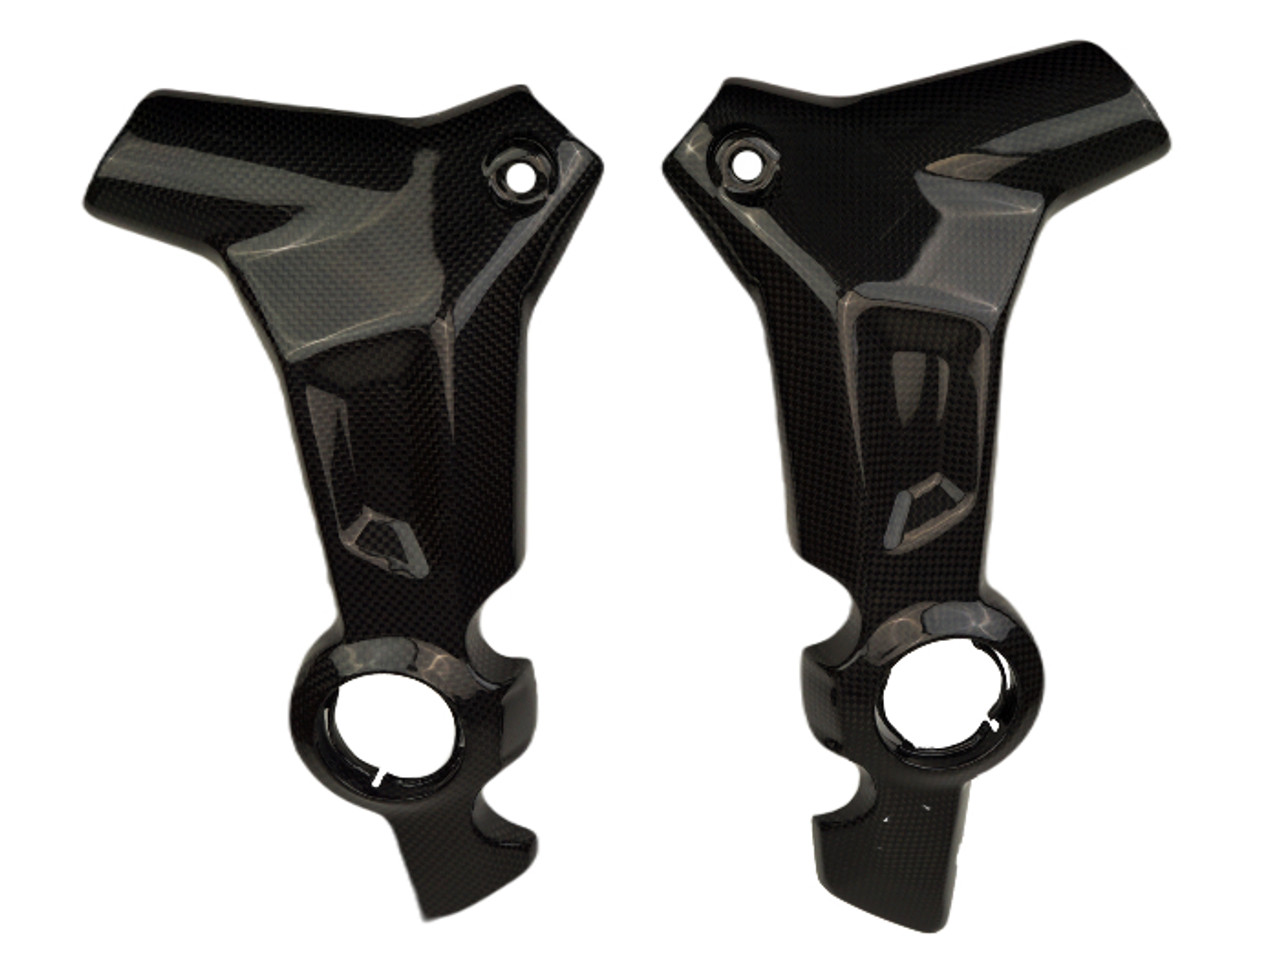 Frame Covers in Glossy Plain Weave Carbon Fiber for Triumph Trident 660

